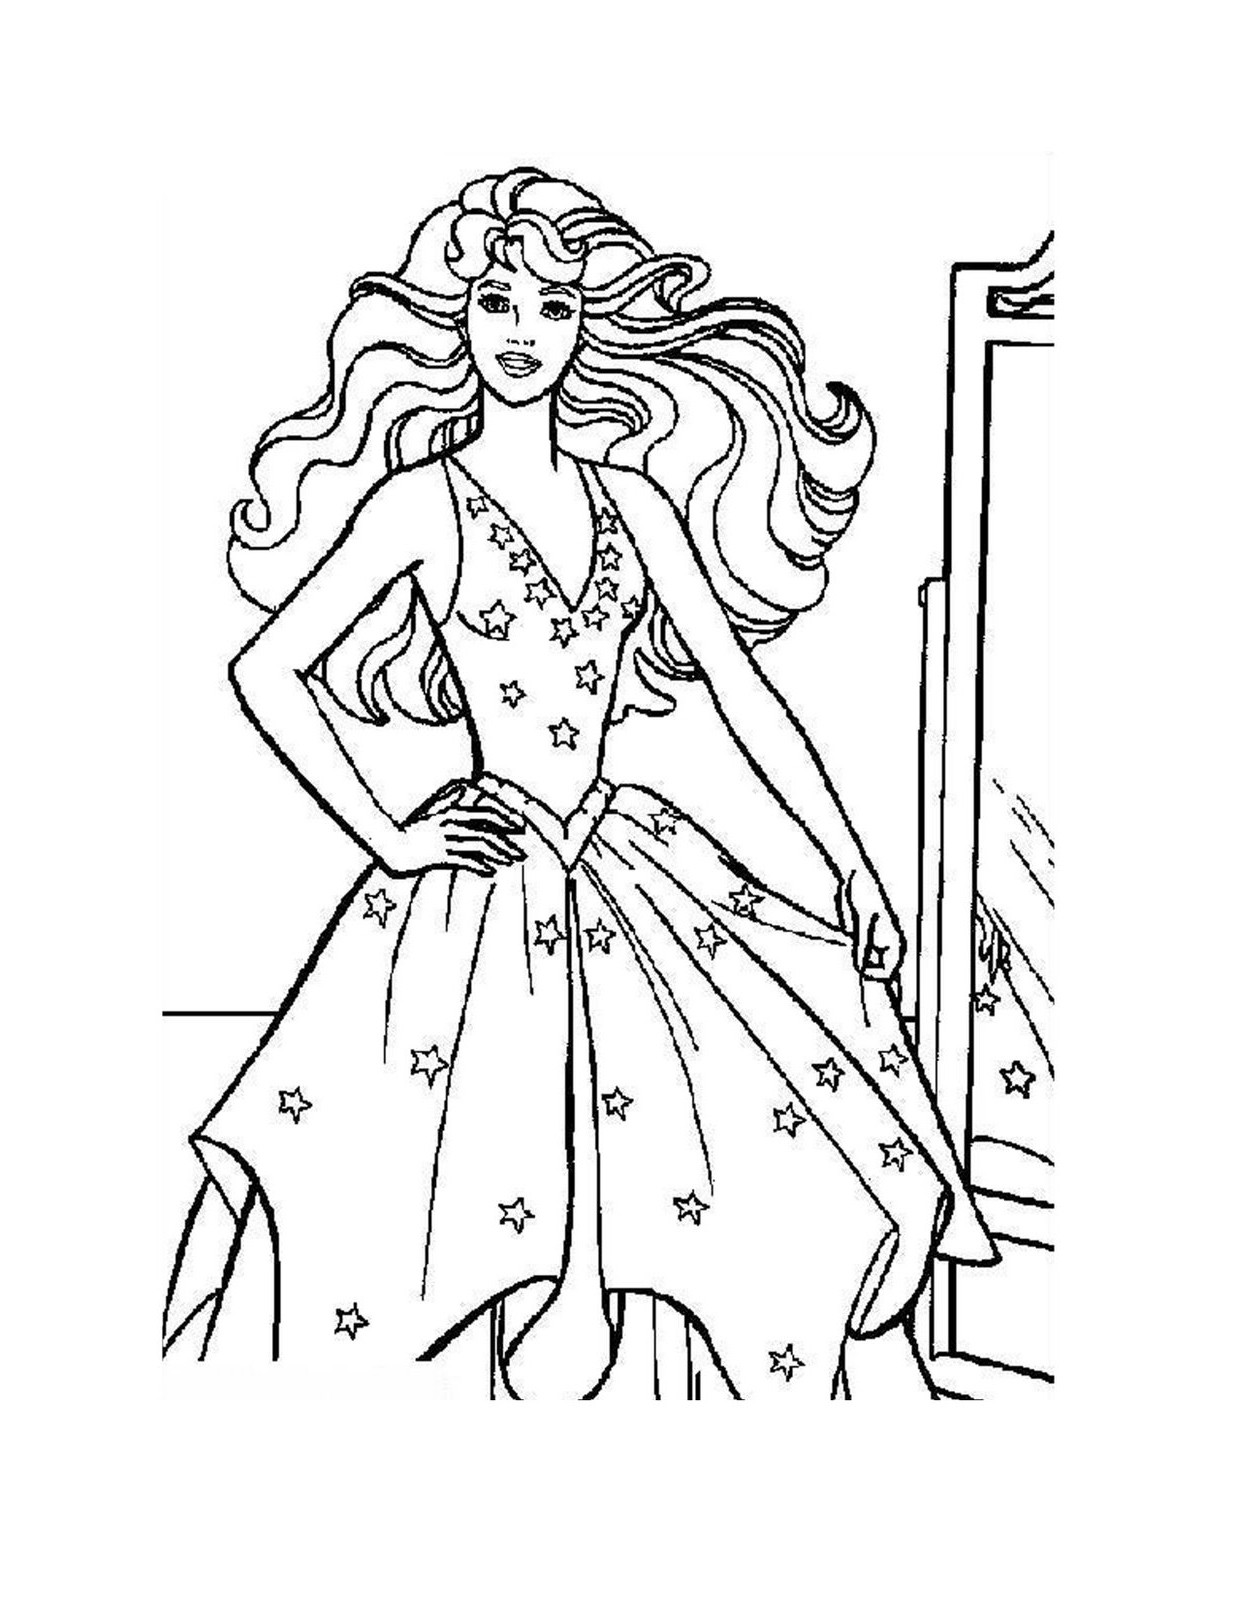 Disney Princess Coloring Pages For Kids
 Princess Outline Drawing at GetDrawings